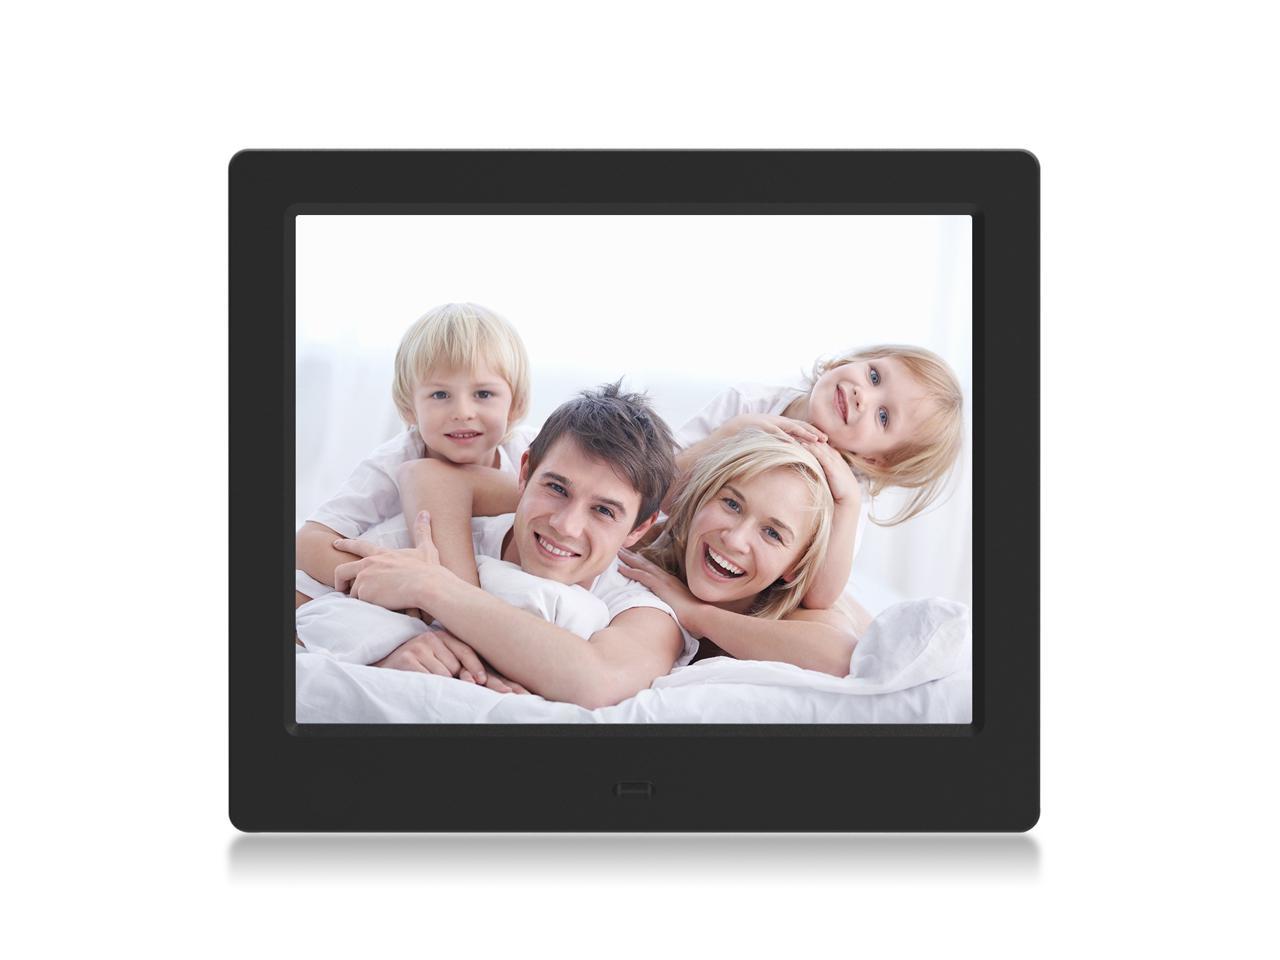 Digital Picture Frame 8 Inch Photo Slideshow Functions – Vucatimes F8 XGA High Resolution LCD Screen Music and Video Play Calendar with Remote Control USB and SD Card Slots Auto On and Off – Black